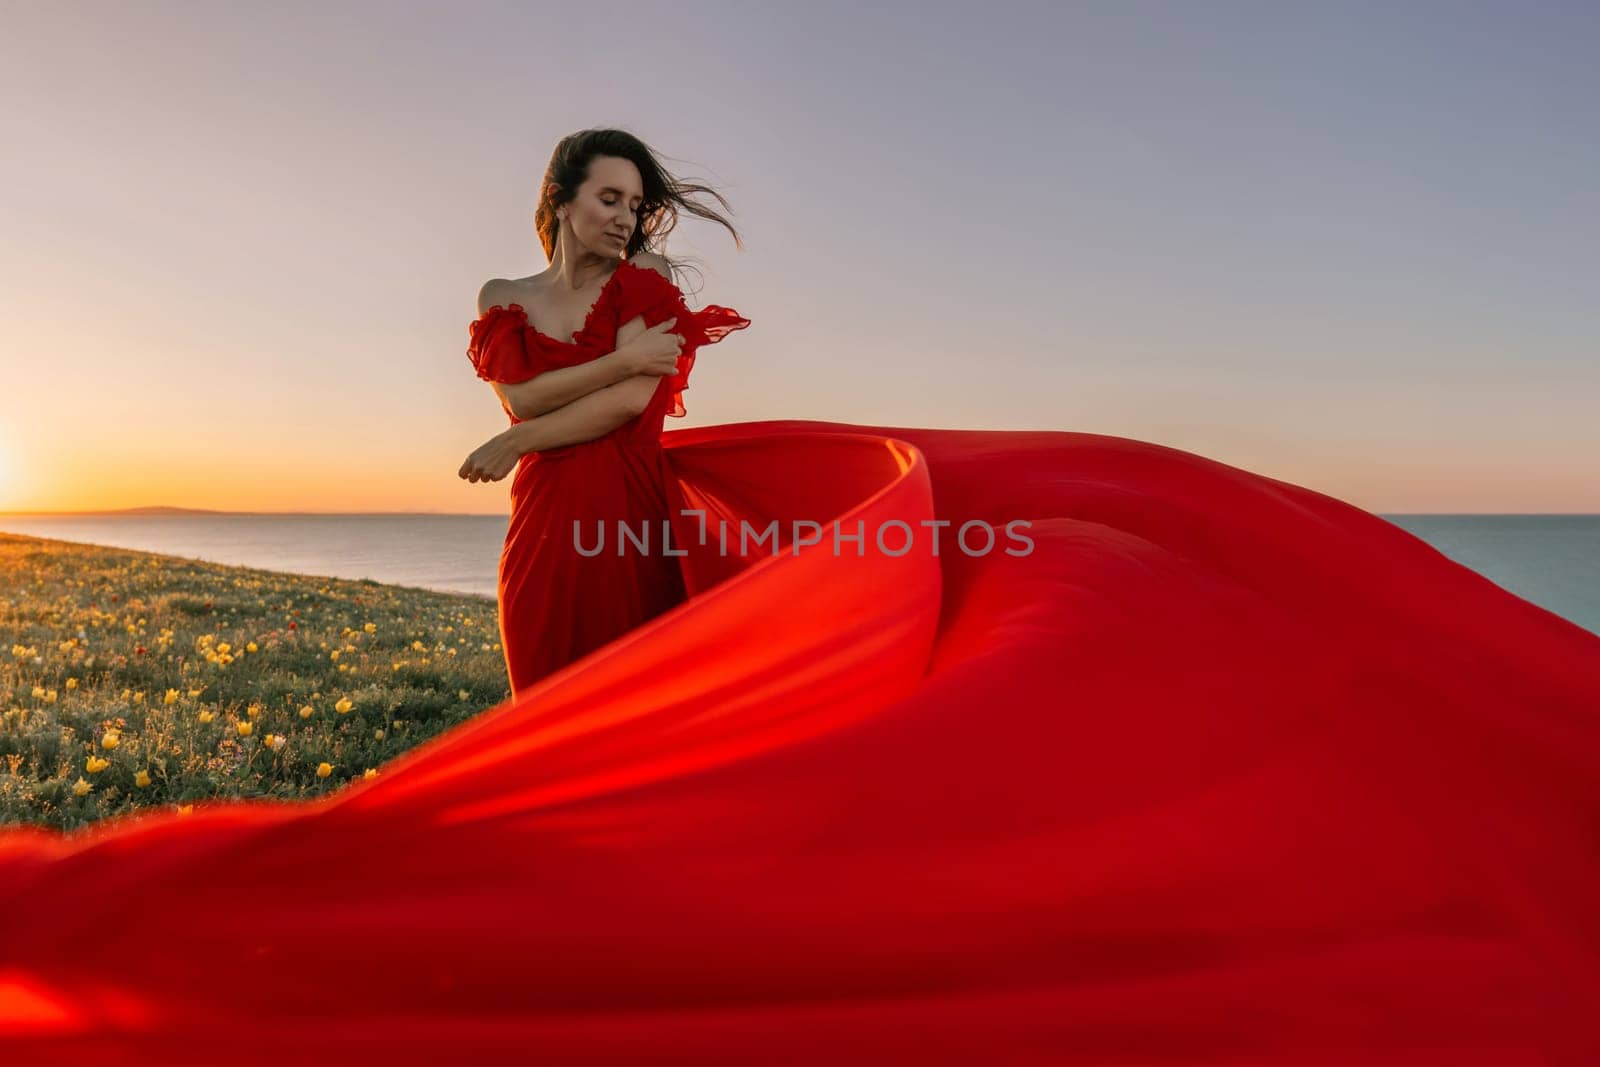 woman red dress standing grassy hillside. The sun is setting in the background, casting a warm glow over the scene. The woman is enjoying the beautiful view and the peaceful atmosphere